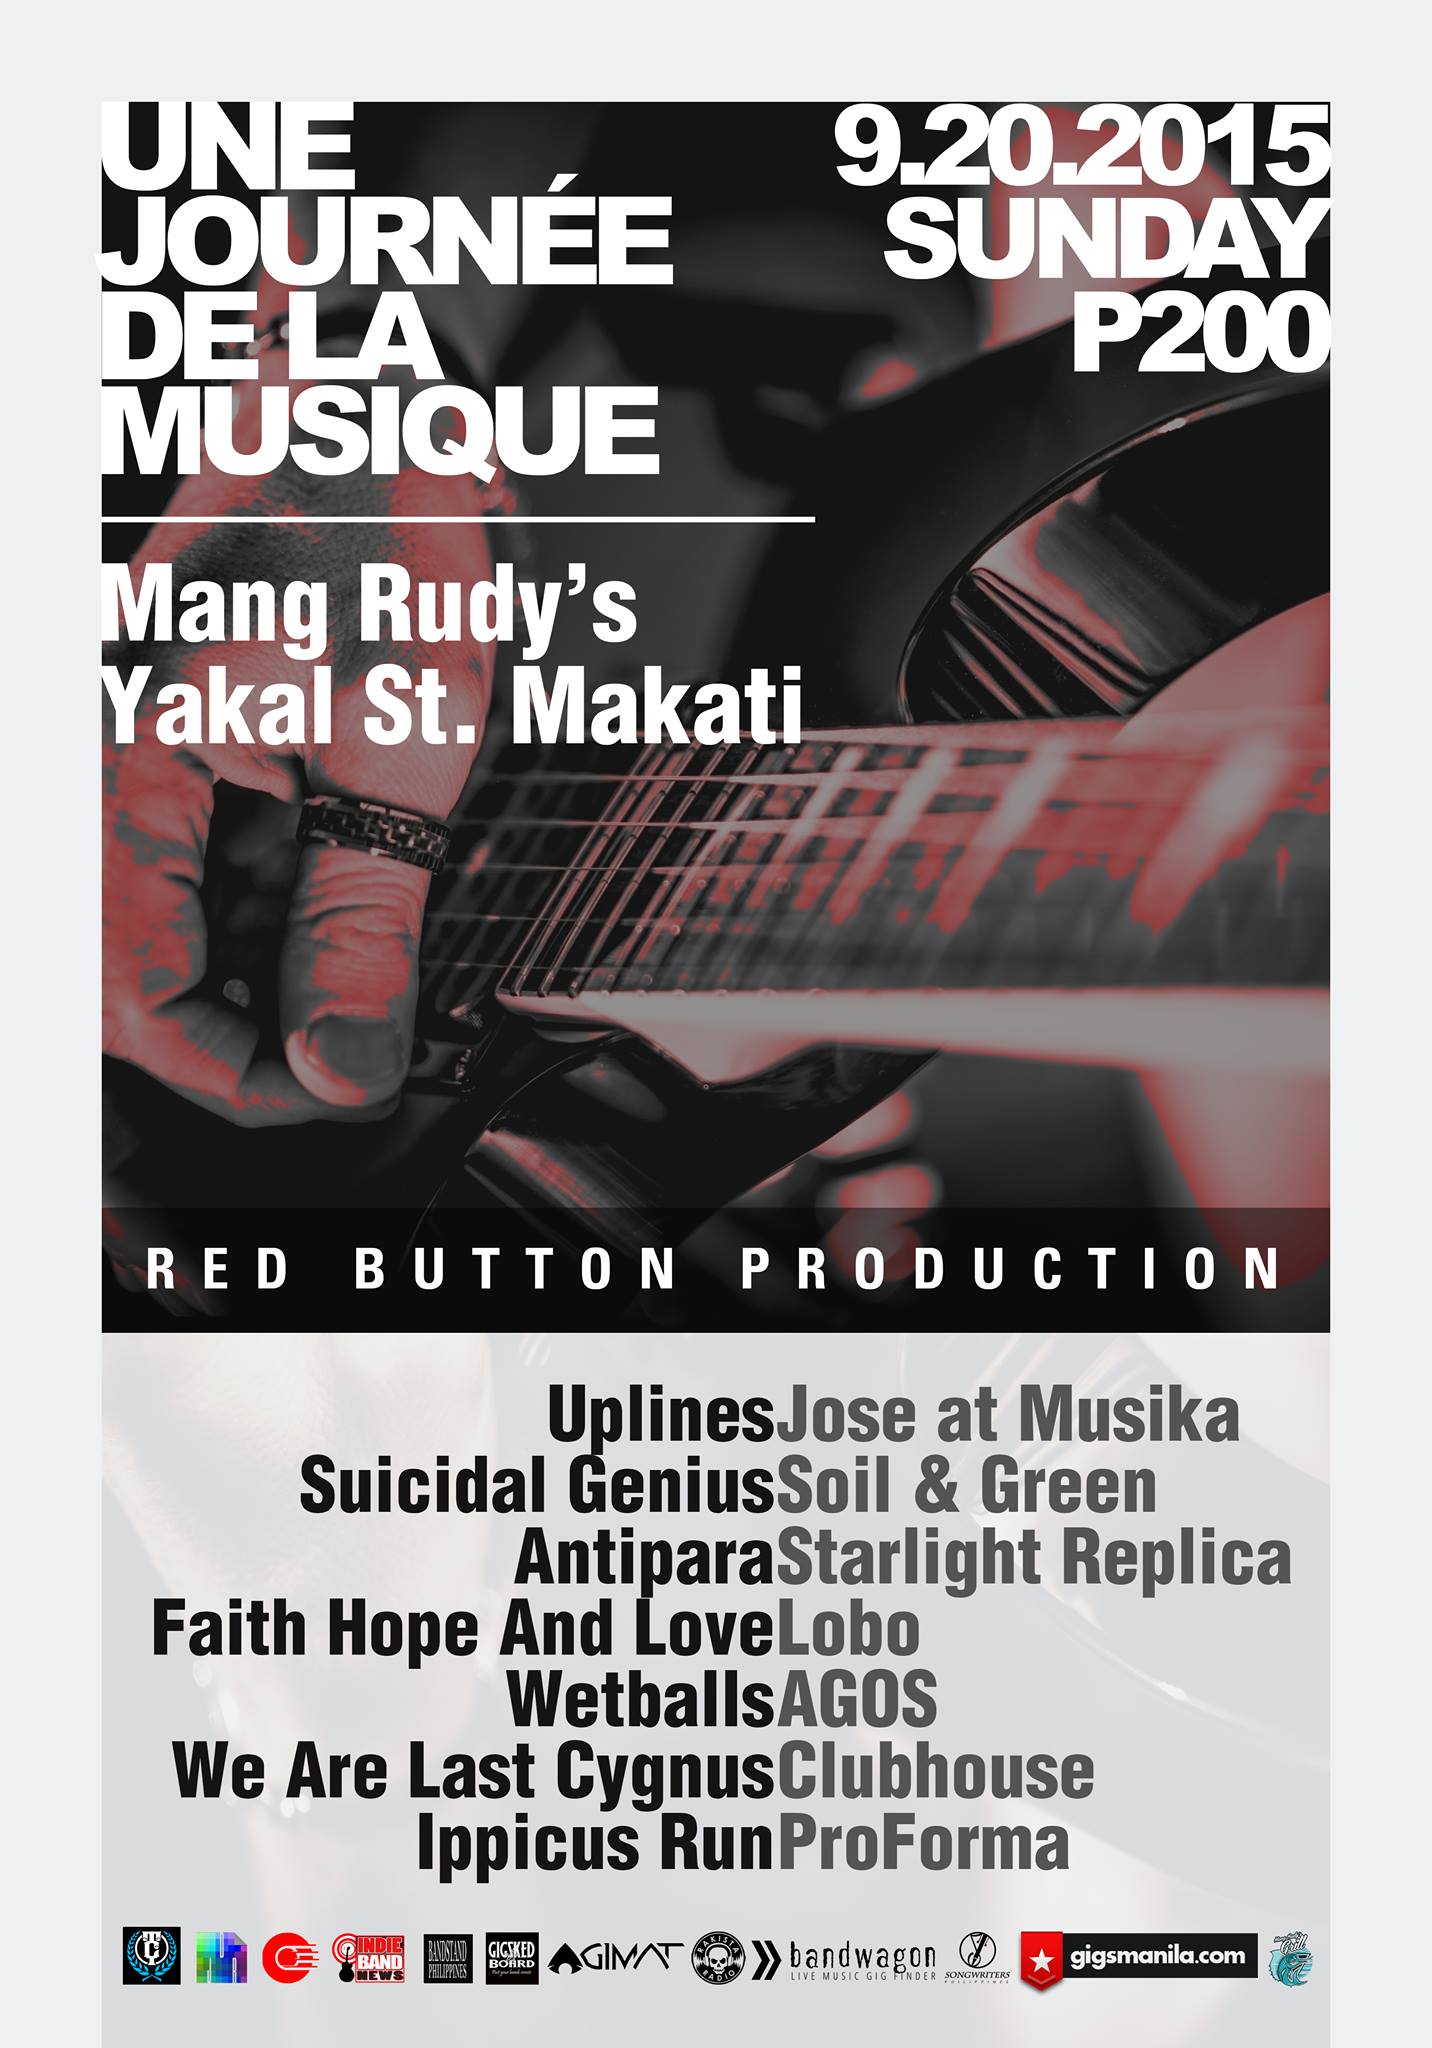 Today at 5:23am Starts in about 3 hours · 80°F Partly Cloudy Show Map Mang Rudy's Tuna Grill And Papaitan 148 A Yakal Street San Antonio Village, 1230 Makati, Philippines Red Button Production "une journée de la musique" September 20, Sunday | 7PM Mang Rudy's - Yakal St. Makati Entrance Fee: P200 with 1 free beer. performances by: Jose at Musika Soil & Green Starlight Replica Lobo AGOS Clubhouse ProForma Uplines Suicidal Genius Antipara Faith Hope And Love Wetballs We Are Last Cygnus Ippicus Run Event Link: https://www.facebook.com/events/894987190555404/